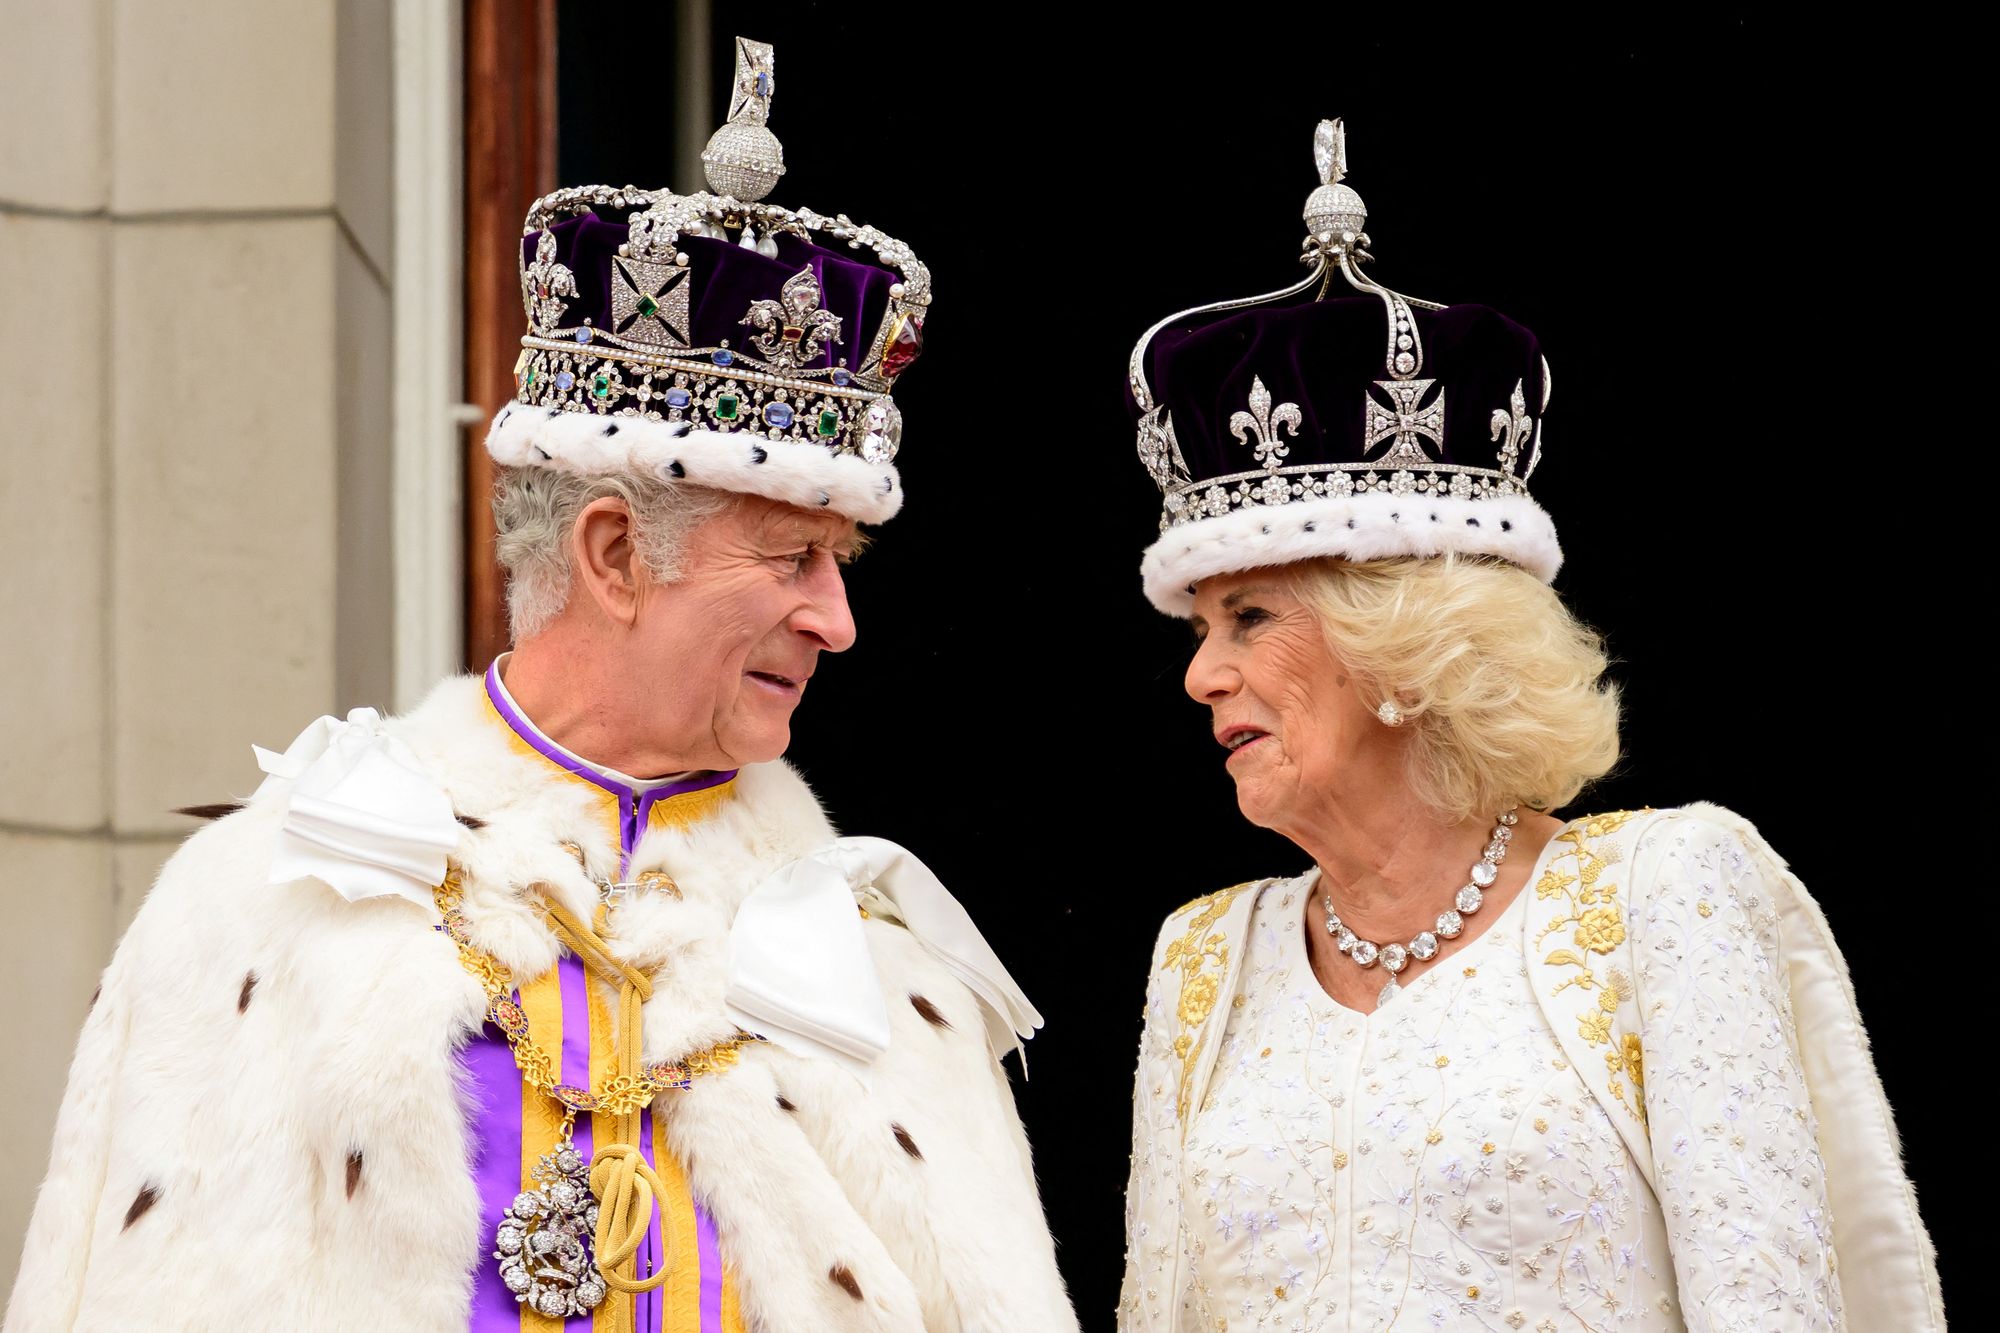 King Charles III's coronation marks a new beginning for the British